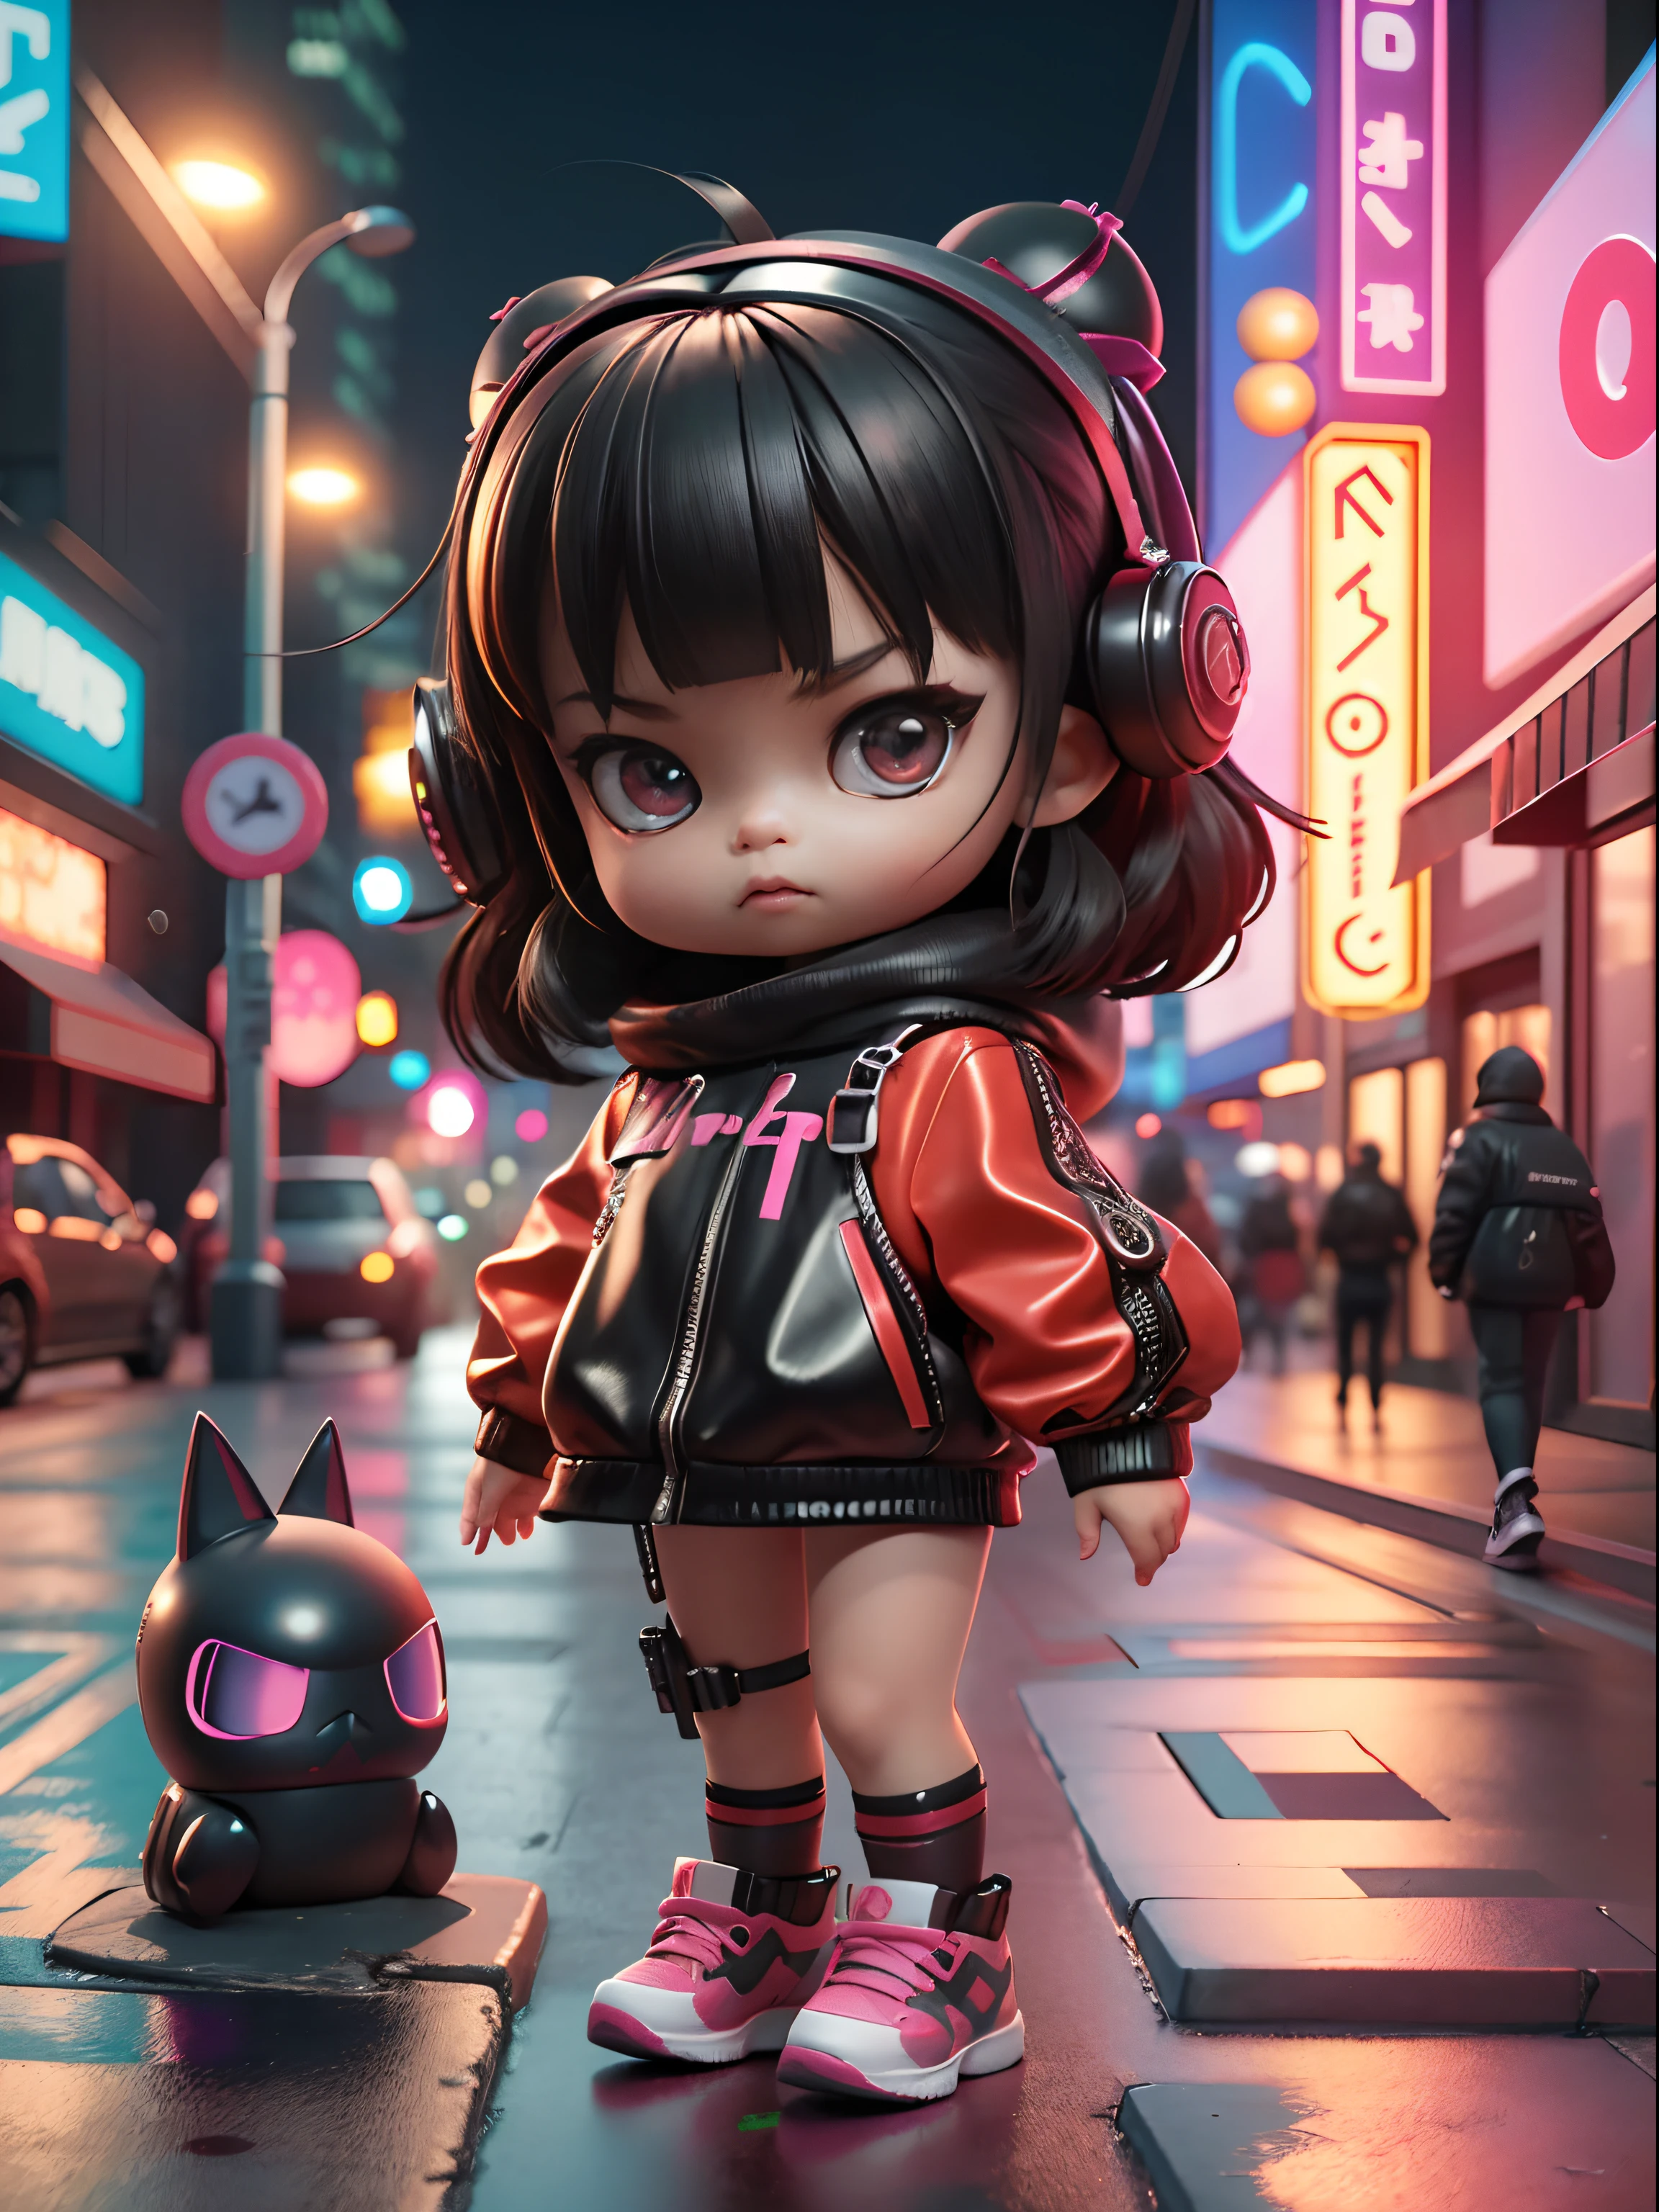 3d toy, 3d rendering, ip, cyberpunk style, chibi, cute , wearing black mask, simple background, best quality, c4d, blender, 3D MODEL, TOYS, VIVID COLORS, STREET STYLE, HIGH RESOLUTION, A LOT OF DETAILS, PIXAR, CANDY COLORS, BIG SHOES, FASHION TRENDS, ART